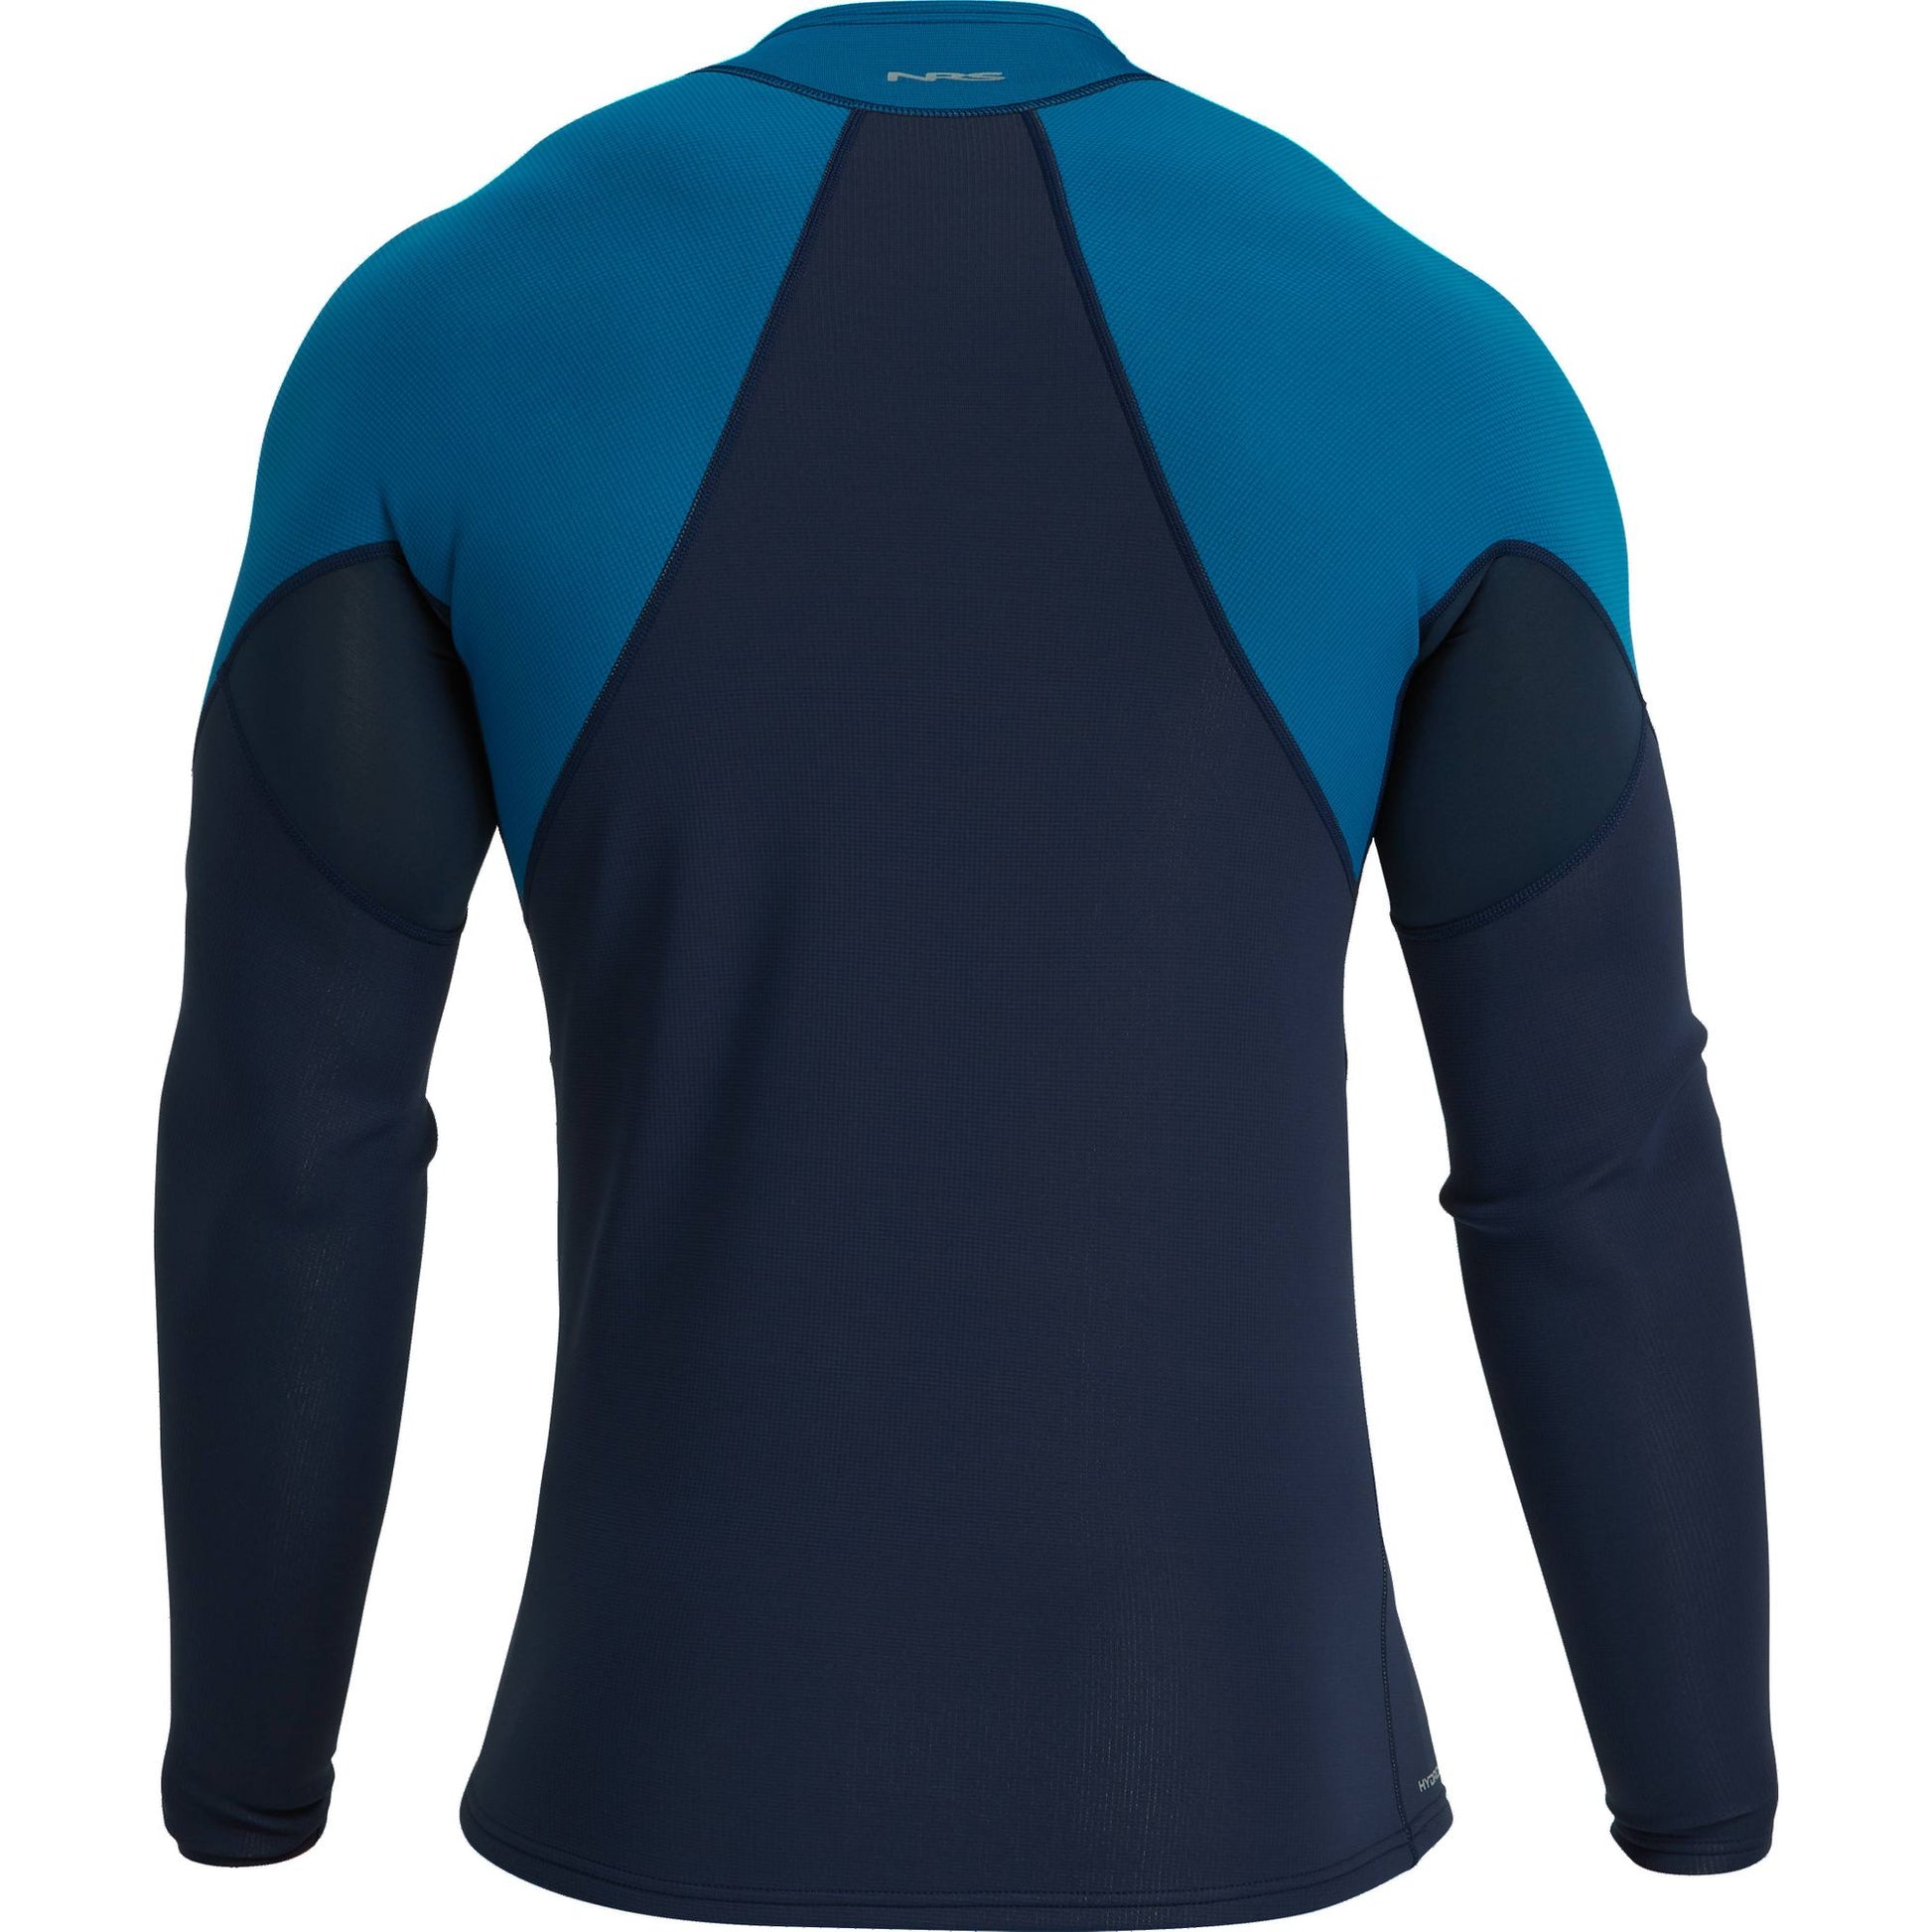 NRS Hydroskin 0.5 Long Sleeve Shirt - Men's, also known as an insulating top, showcasing its back view.